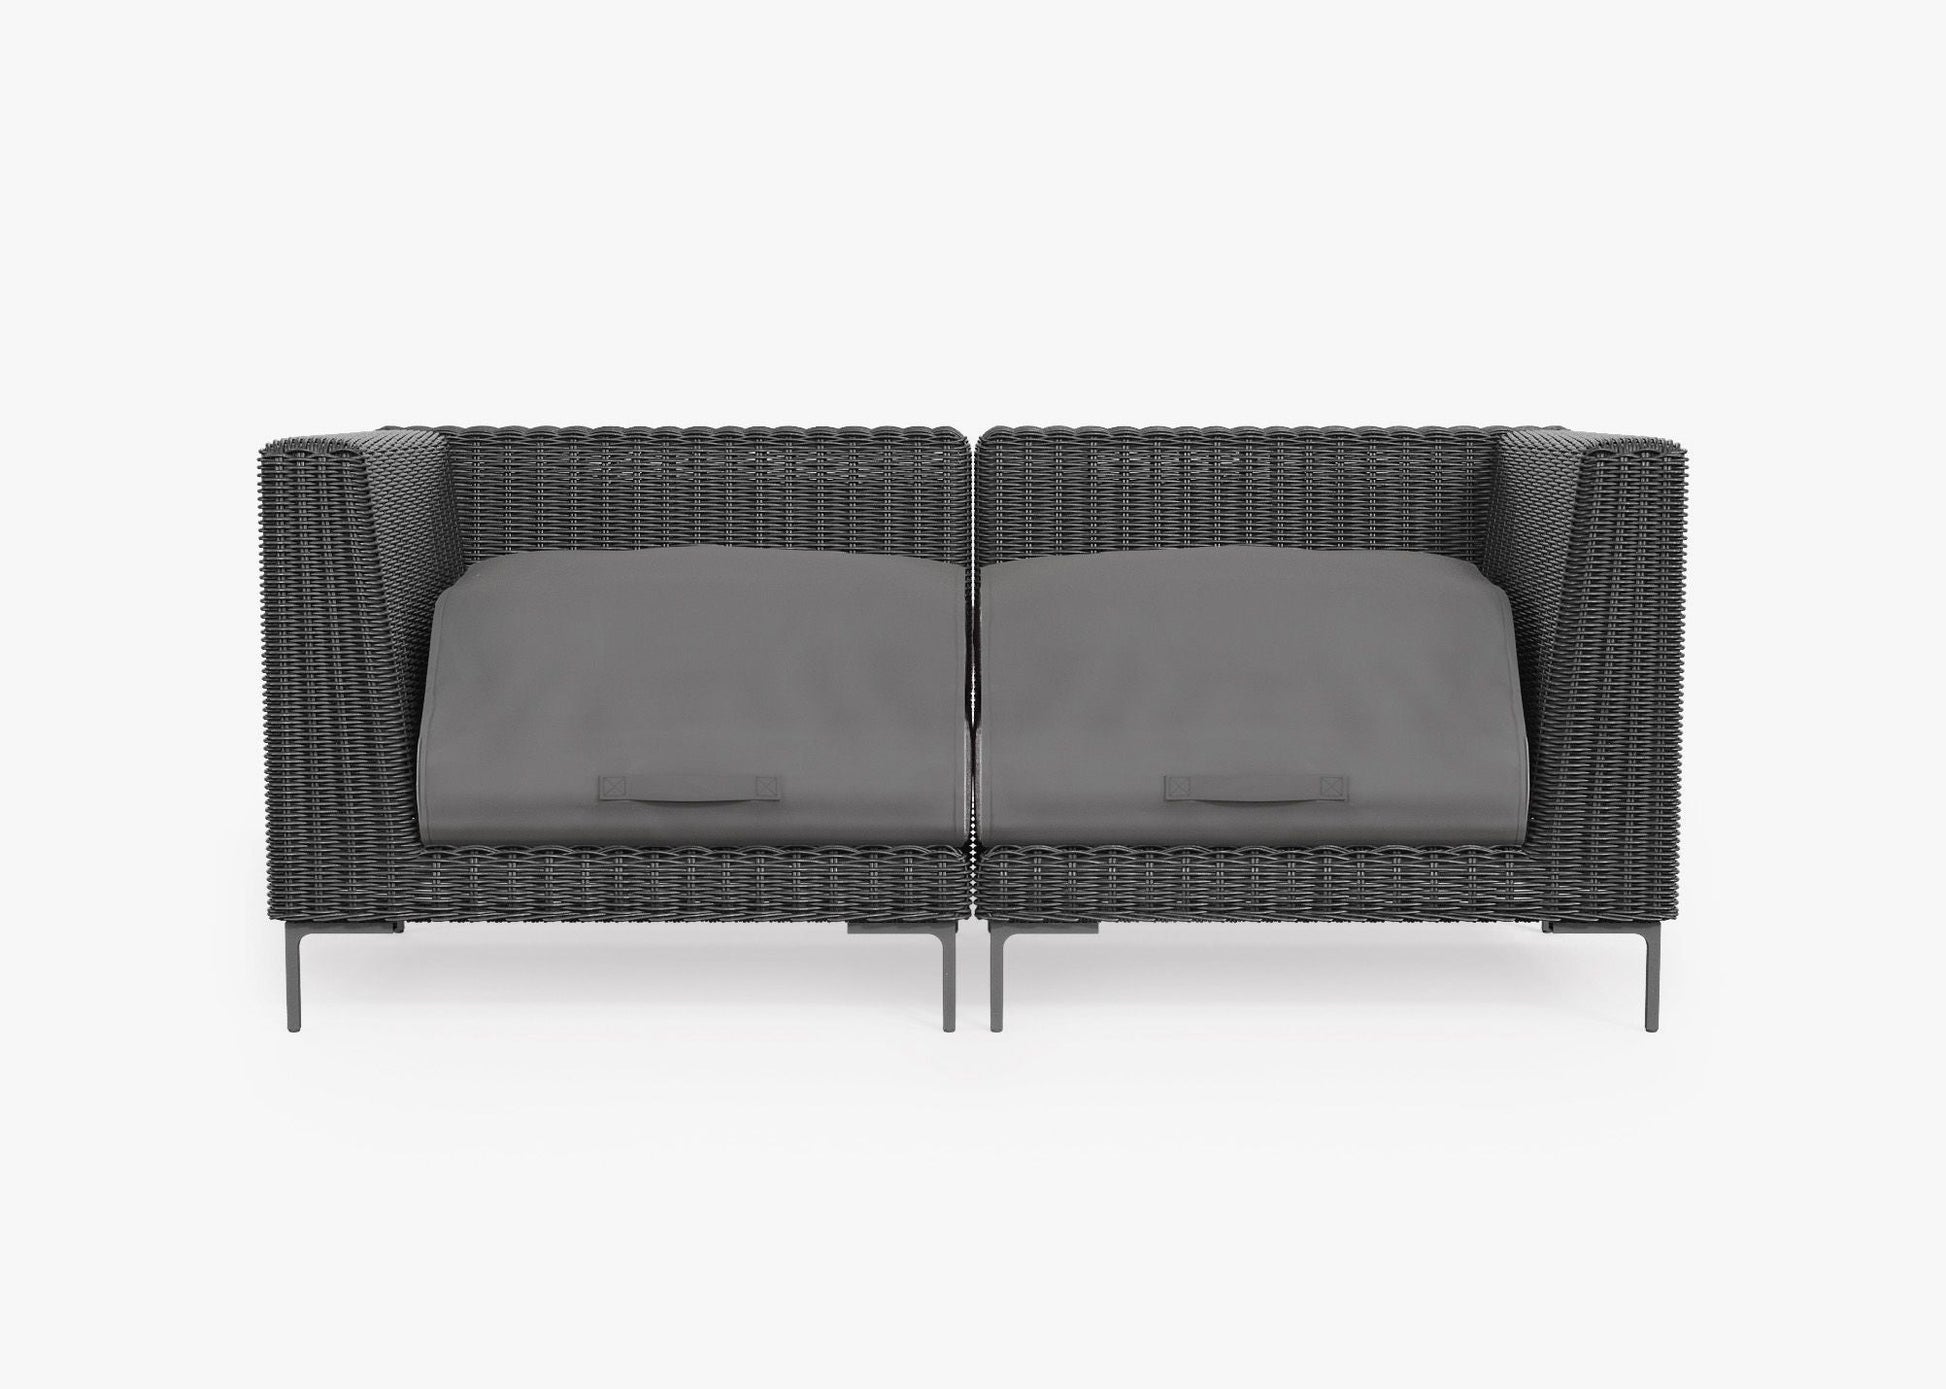 Live Outer 74" Black Wicker Outdoor Loveseat With Dark Pebble Gray Cushion